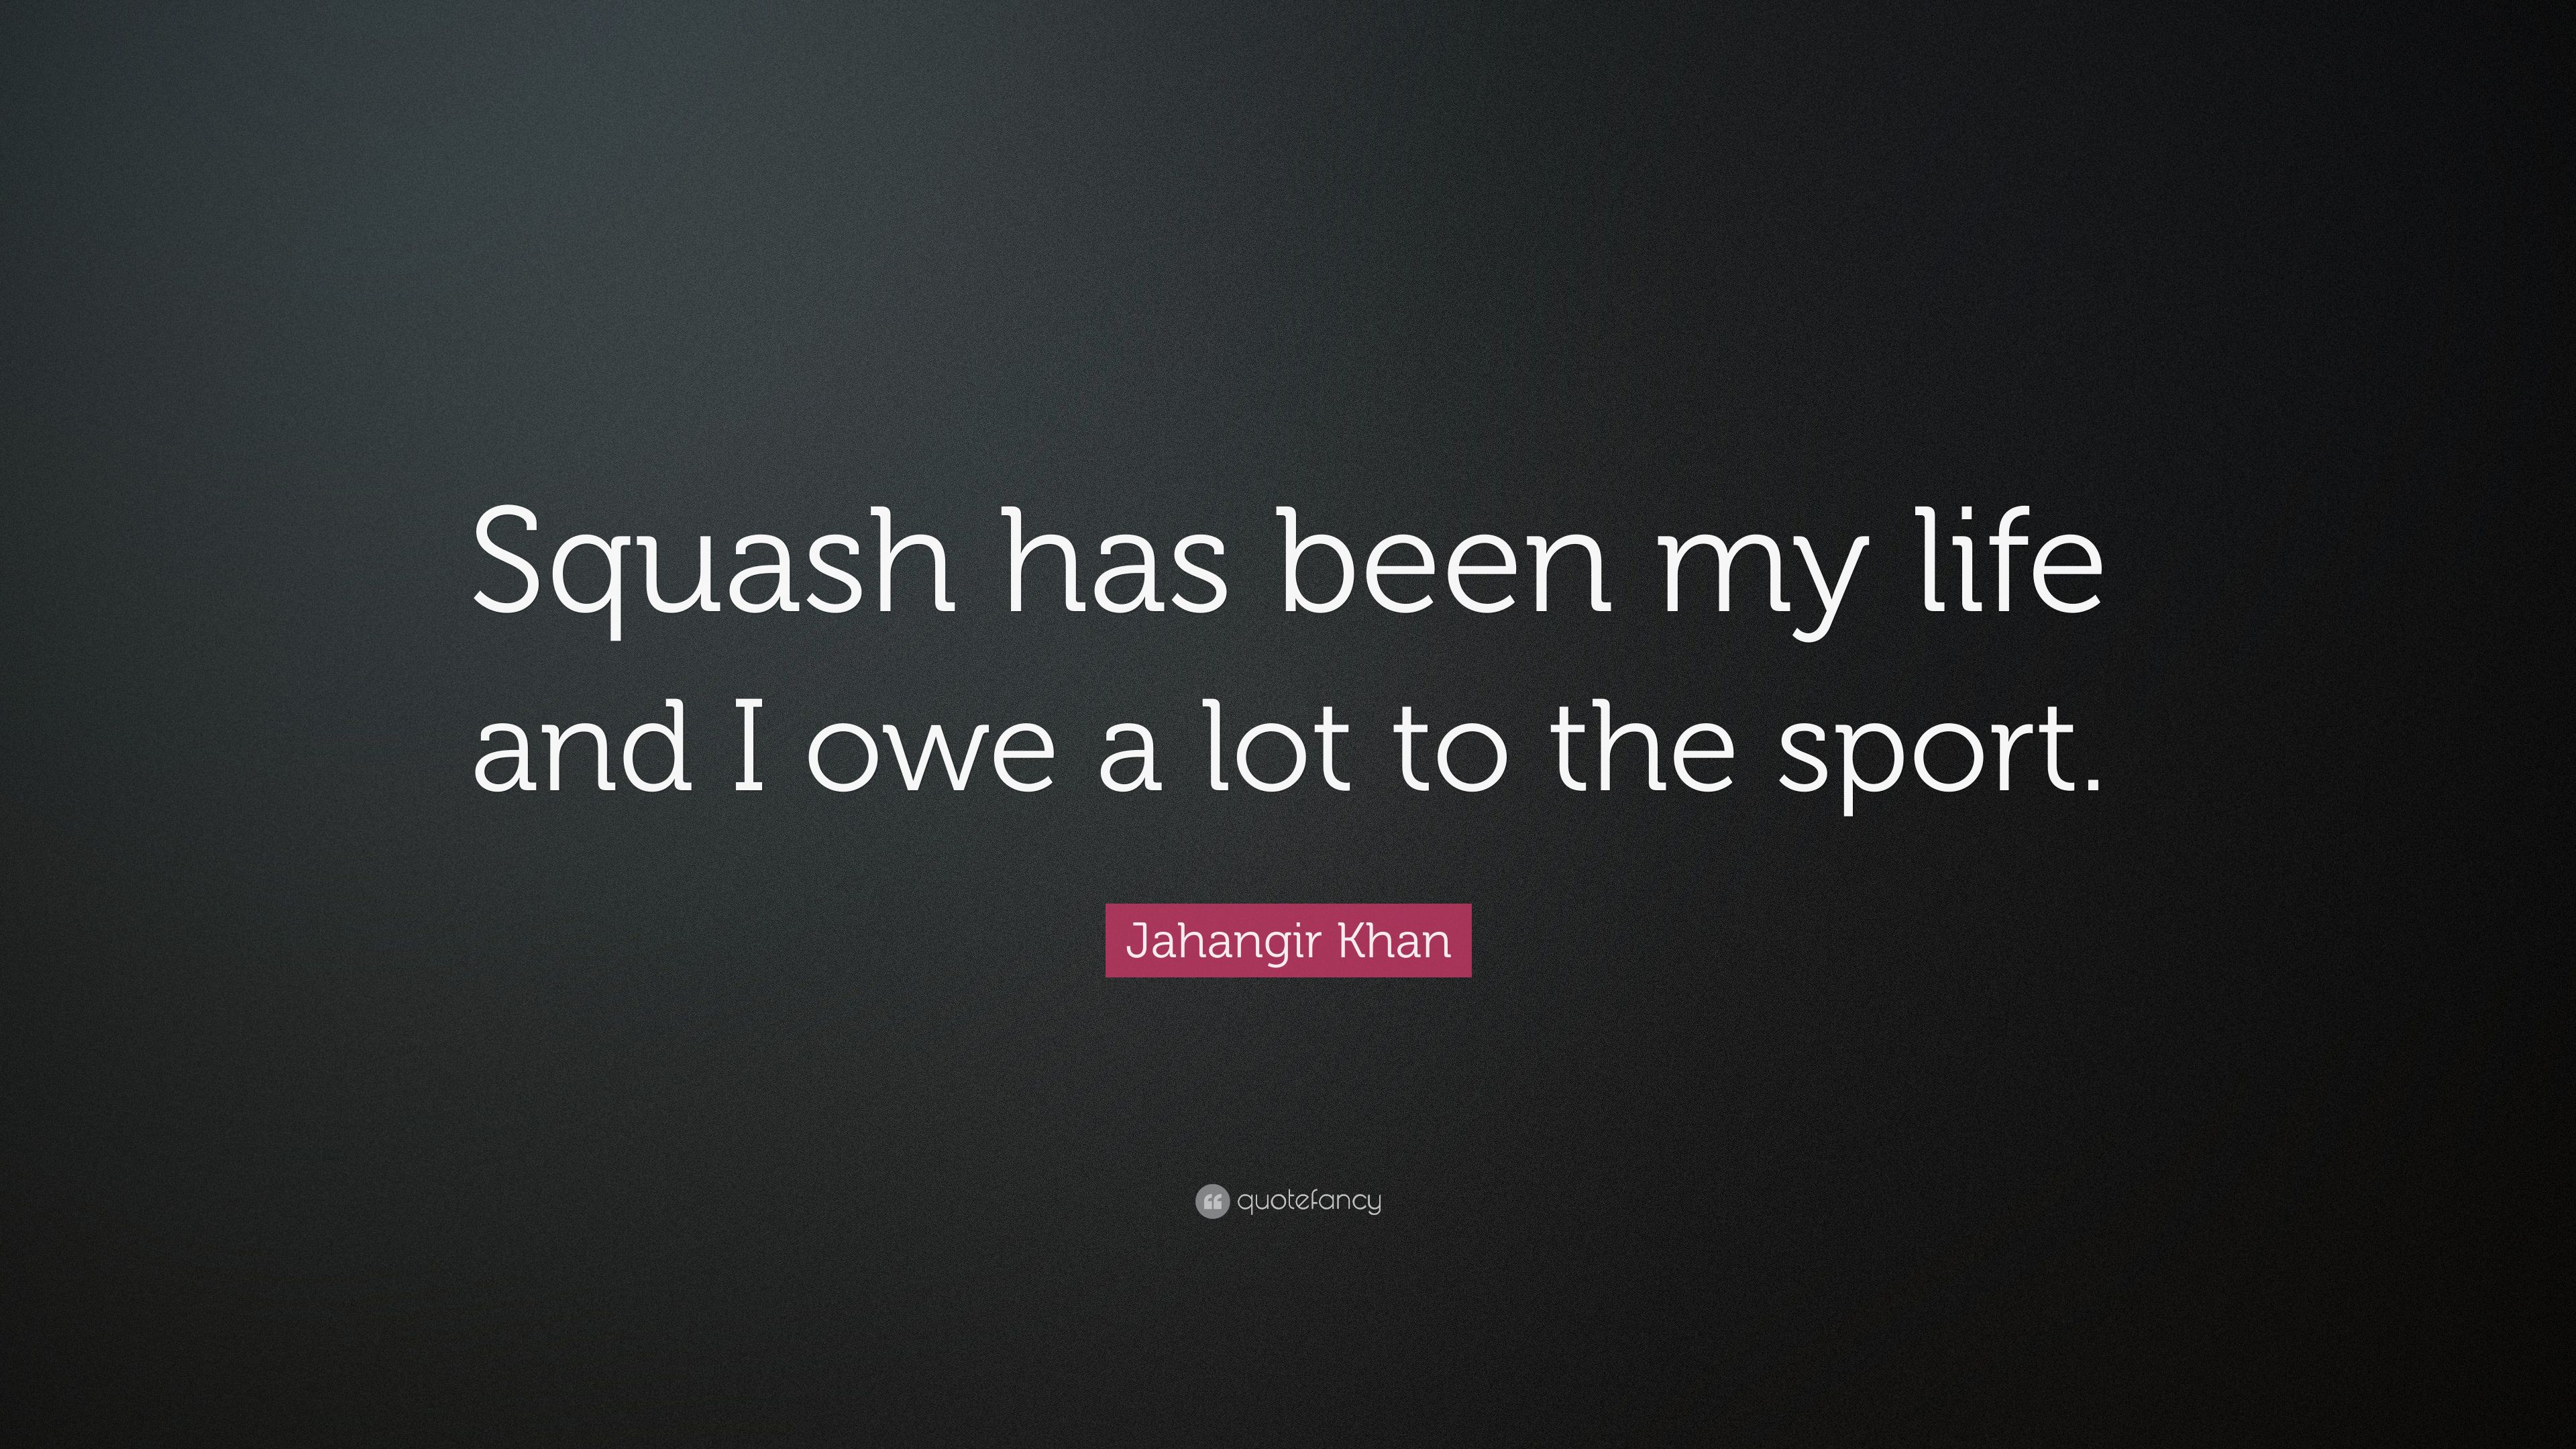 Jahangir Khan Quote: “Squash has been my life and I owe a lot to the sport.” (7 wallpaper)